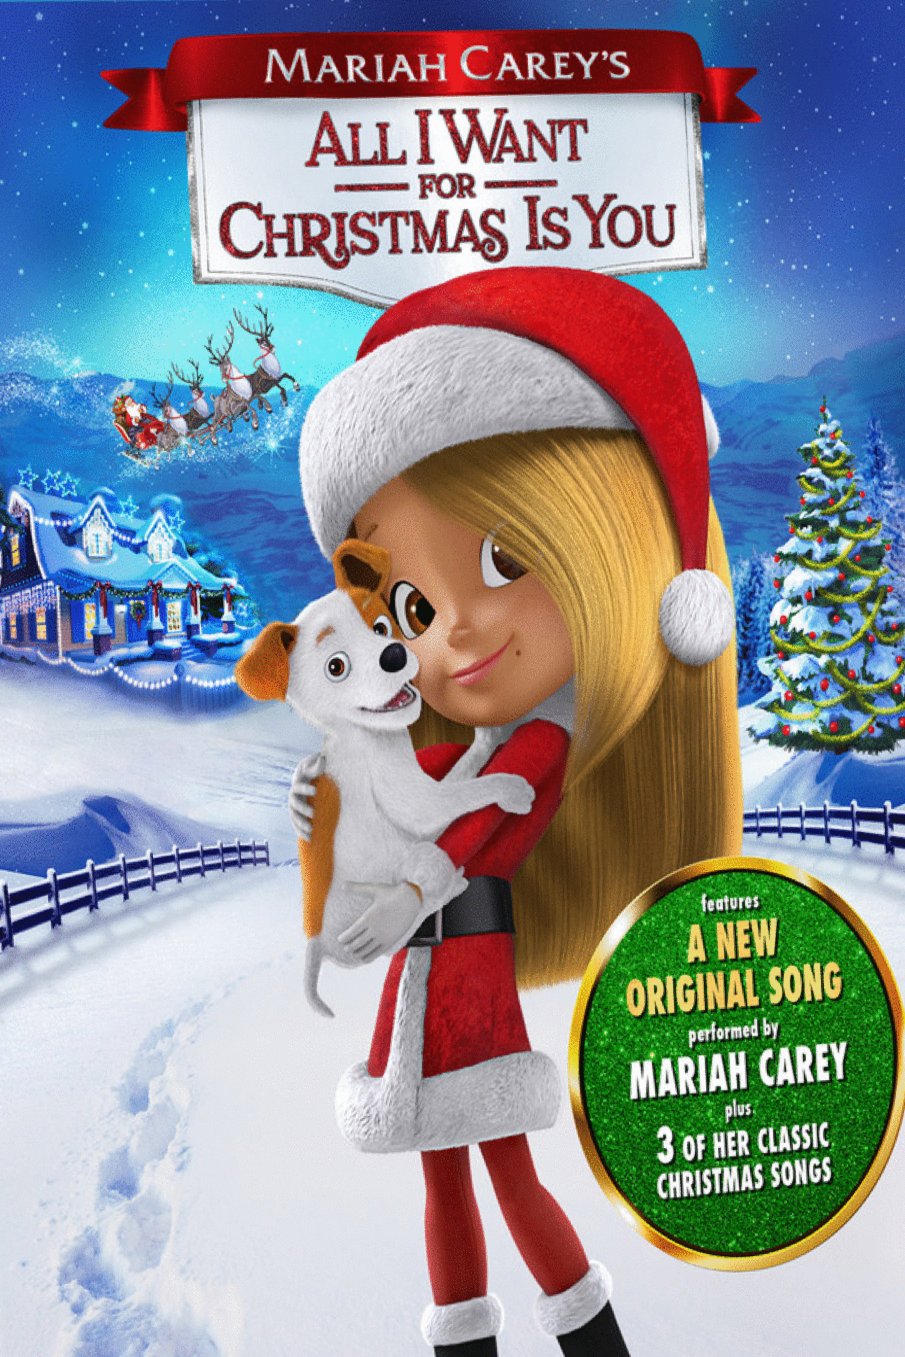 Poster of the movie Mariah Carey's All I Want for Christmas Is You